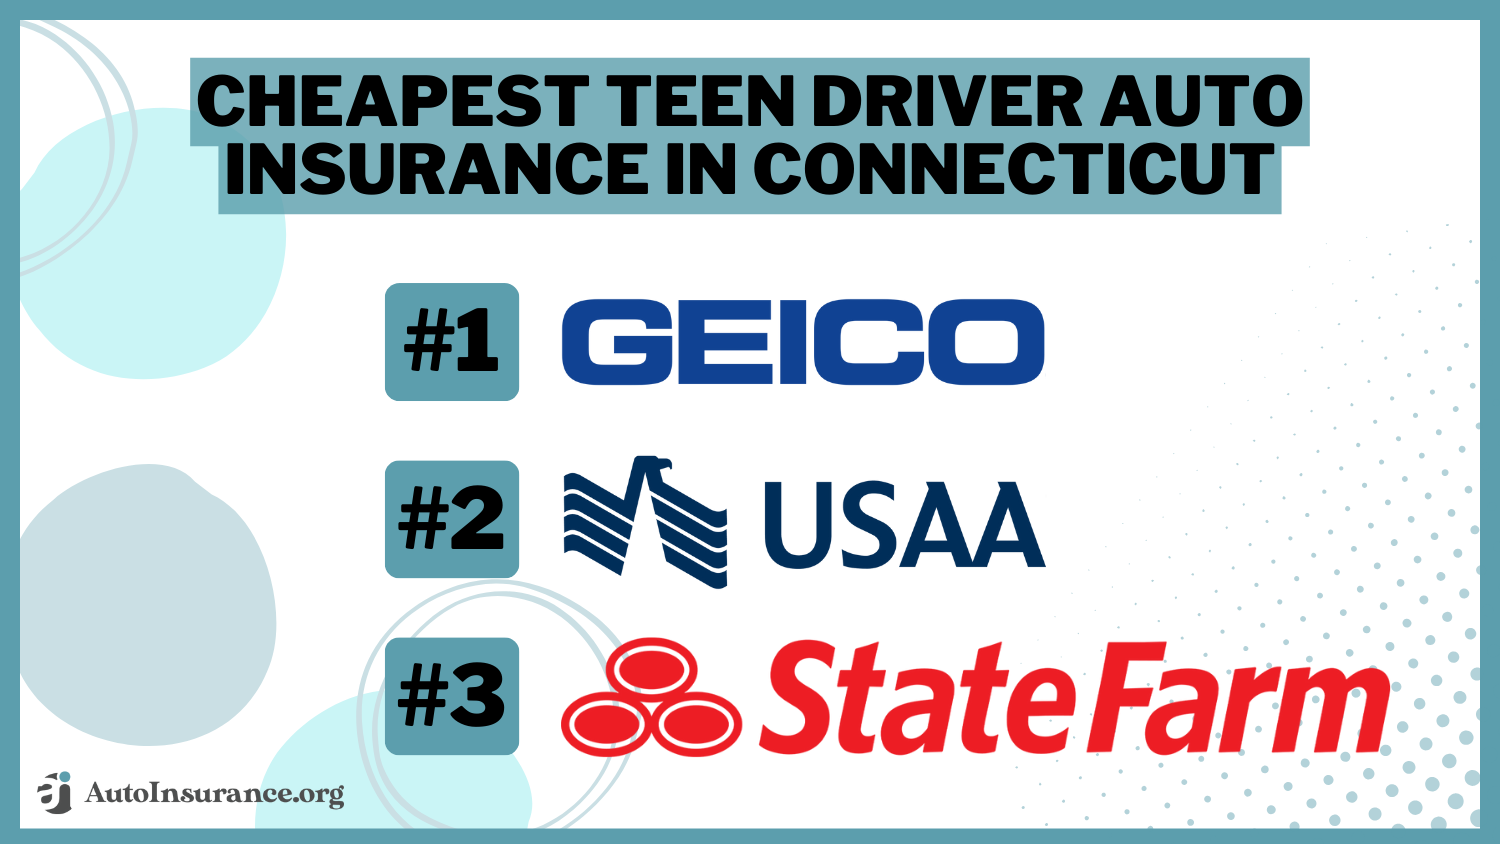 Cheapest Teen Driver Auto Insurance in Connecticut: Geico, USAA, State Farm